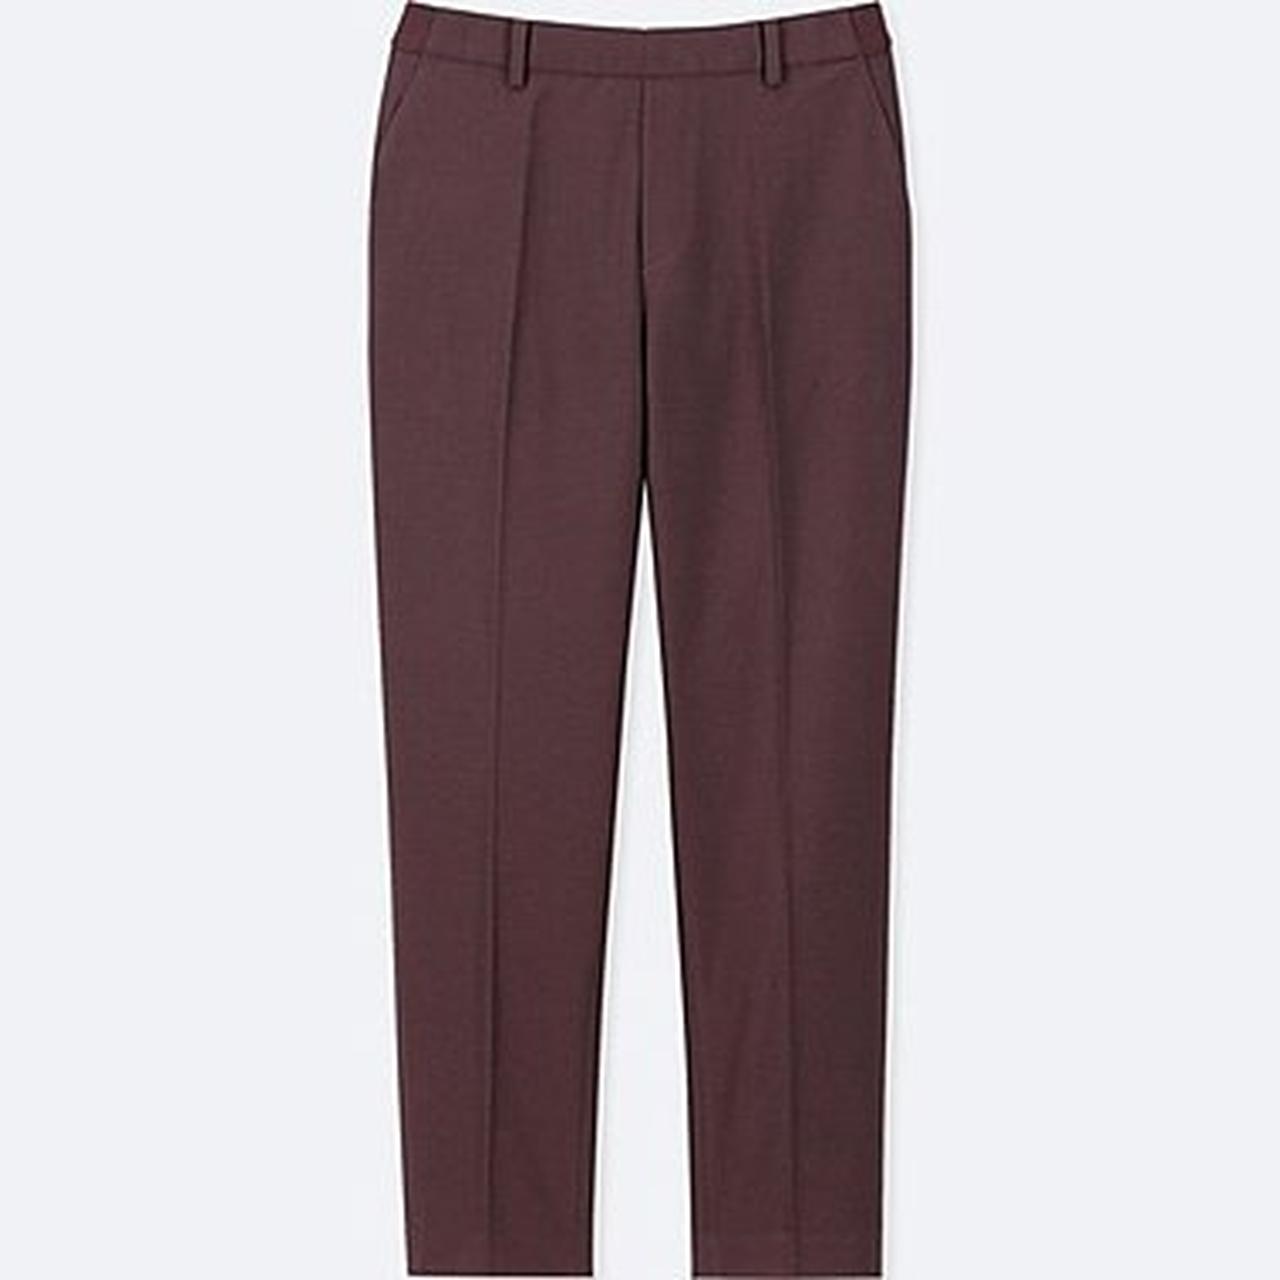 FORGET YOUR JEANS - YOU NEED THESE PANTS FOR FALL - Jessica Wang